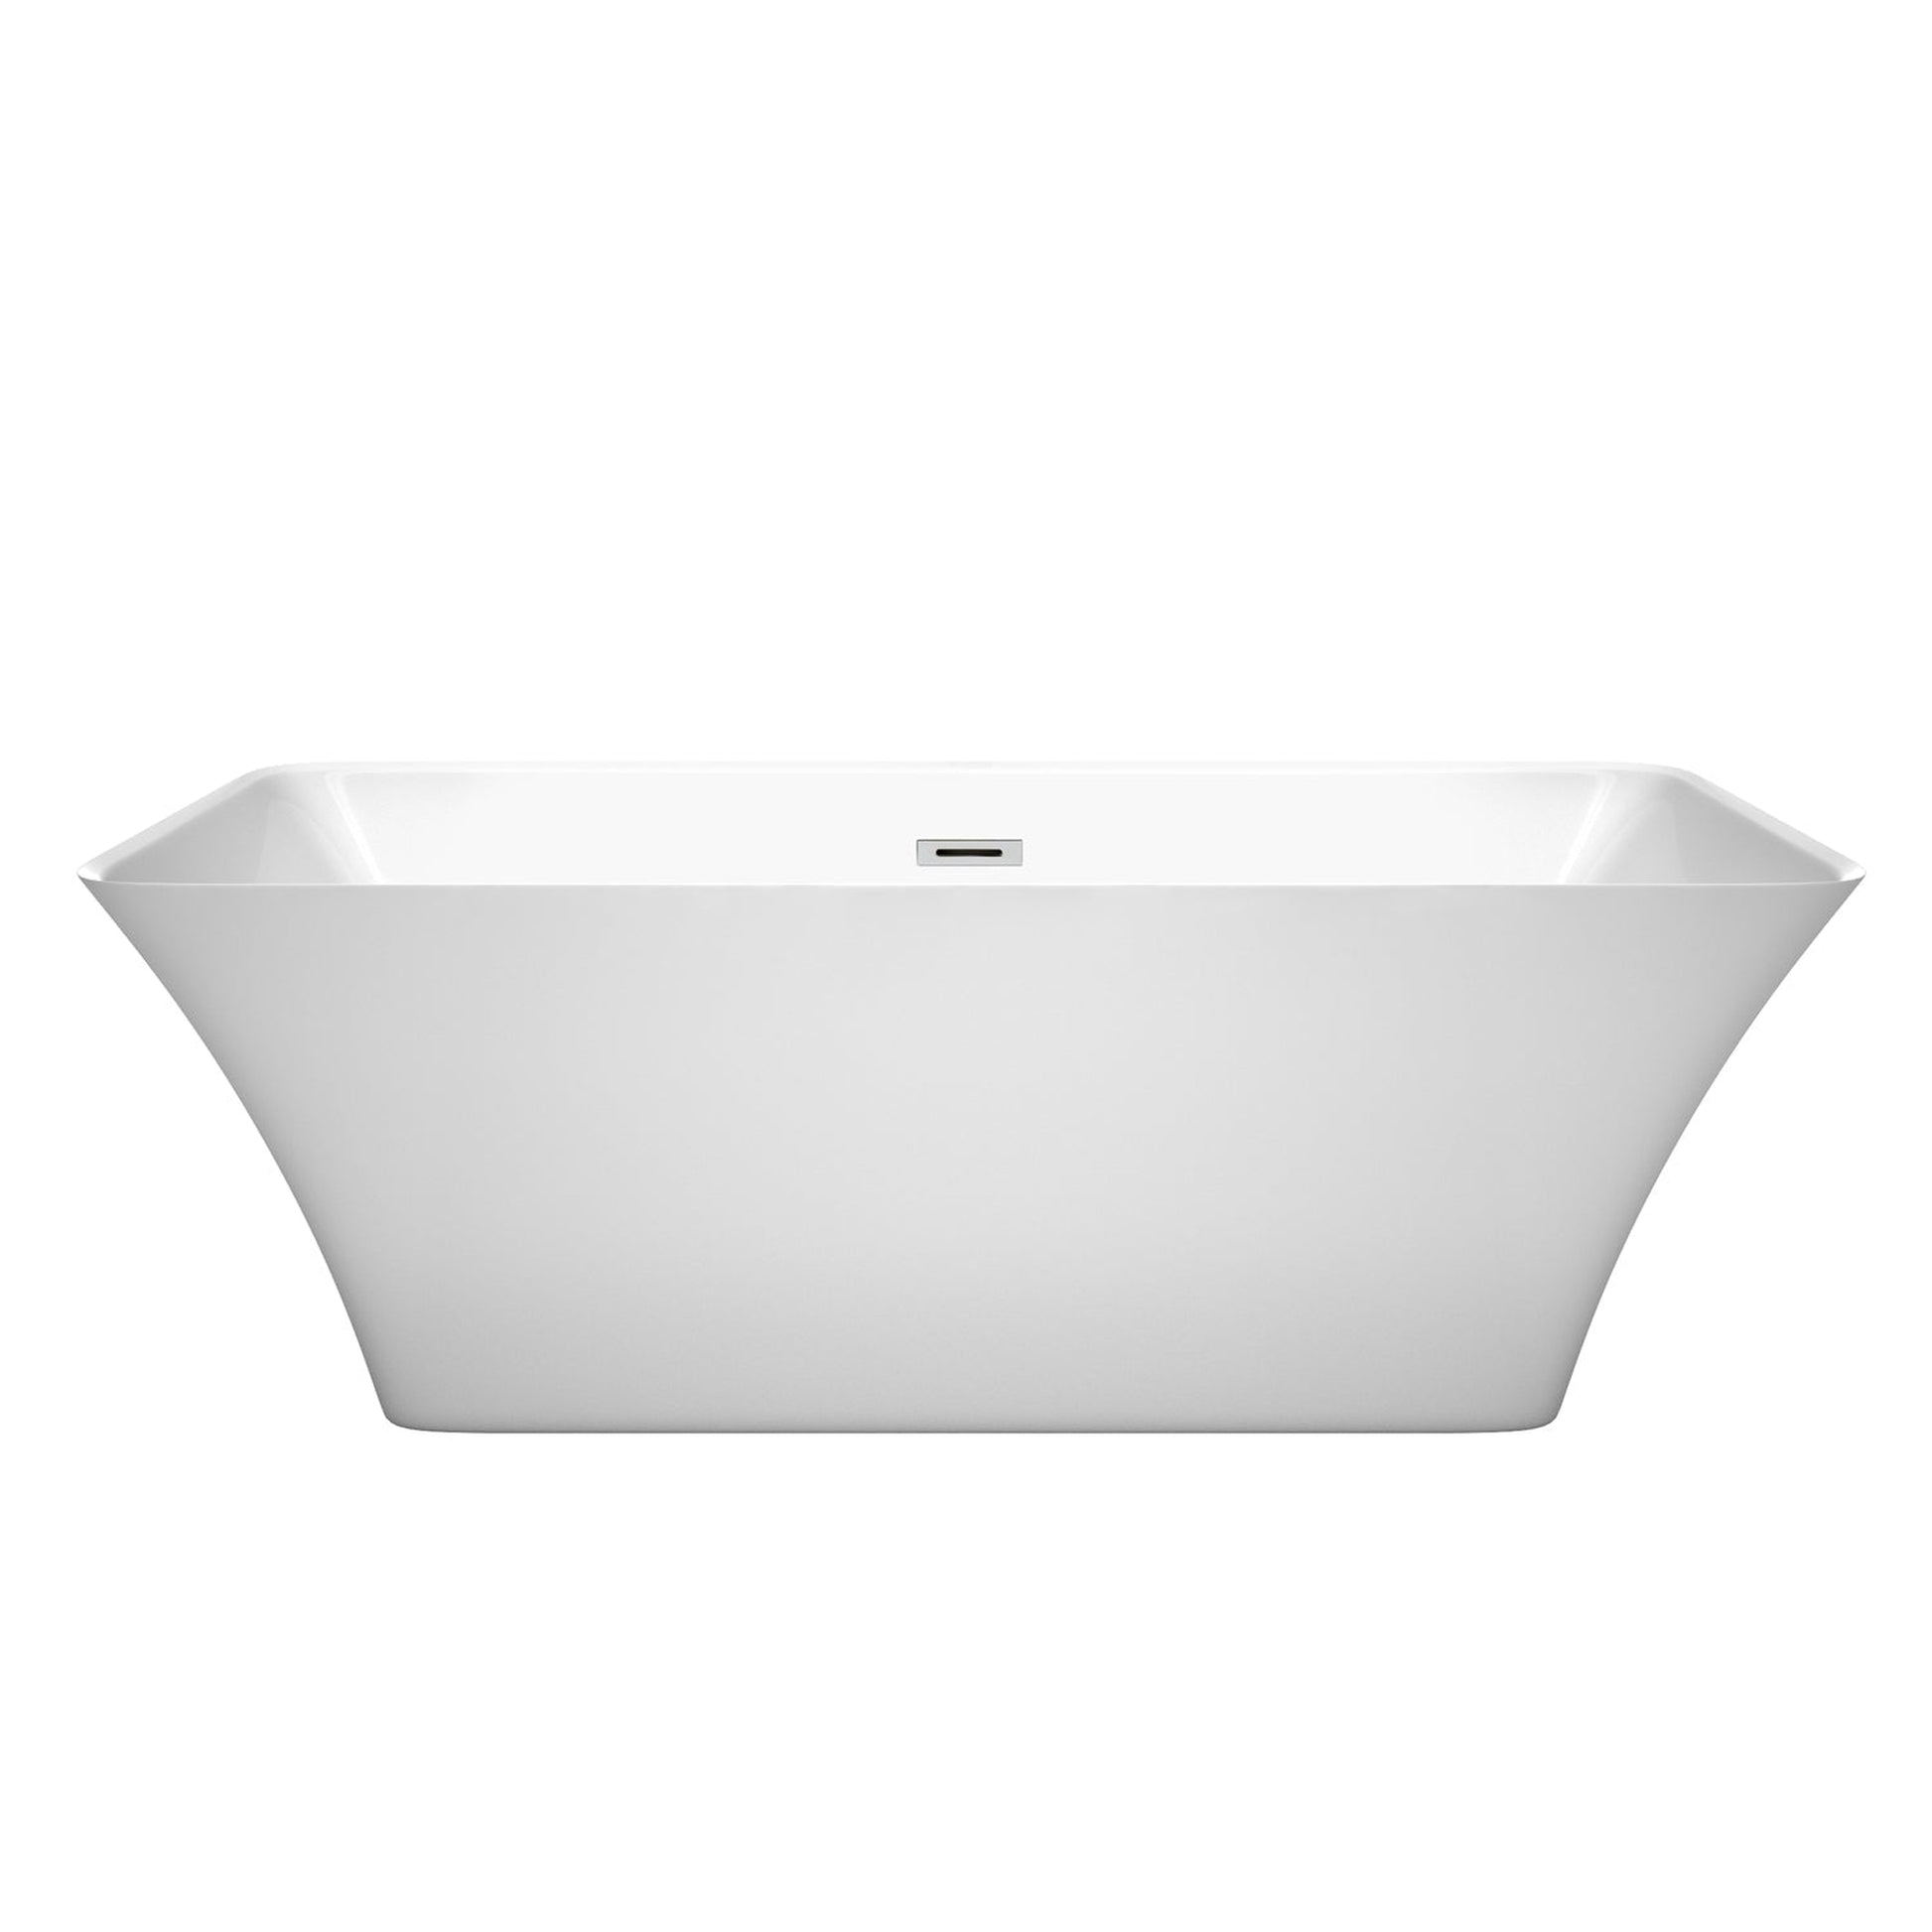 Wyndham Collection Tiffany 67" Freestanding Bathtub in White With Polished Chrome Drain and Overflow Trim